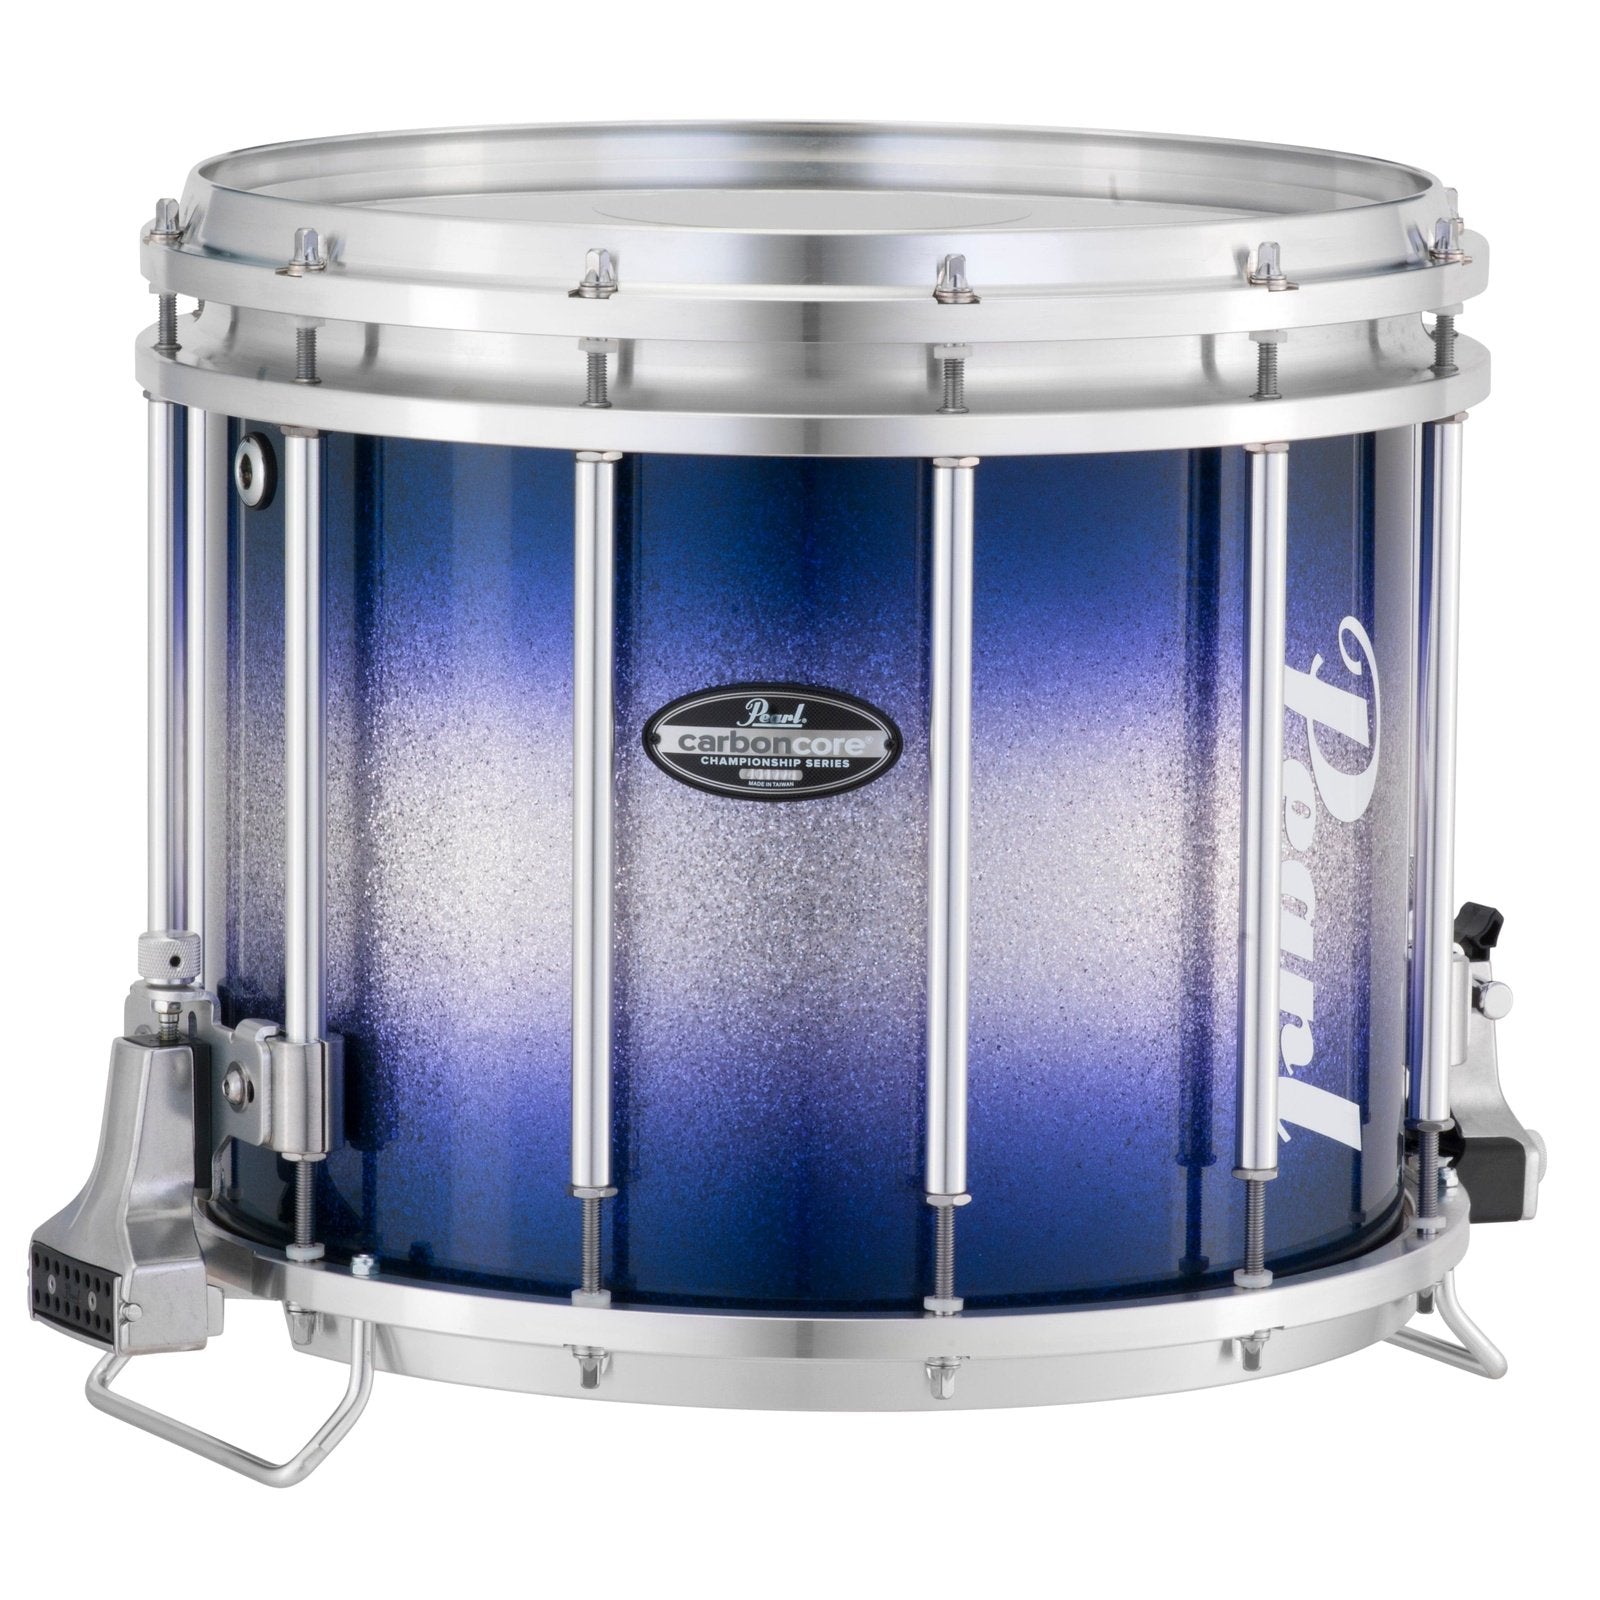 Pearl FFX Carboncore Marching Snare Drum 14x12 Blue Silver Burst